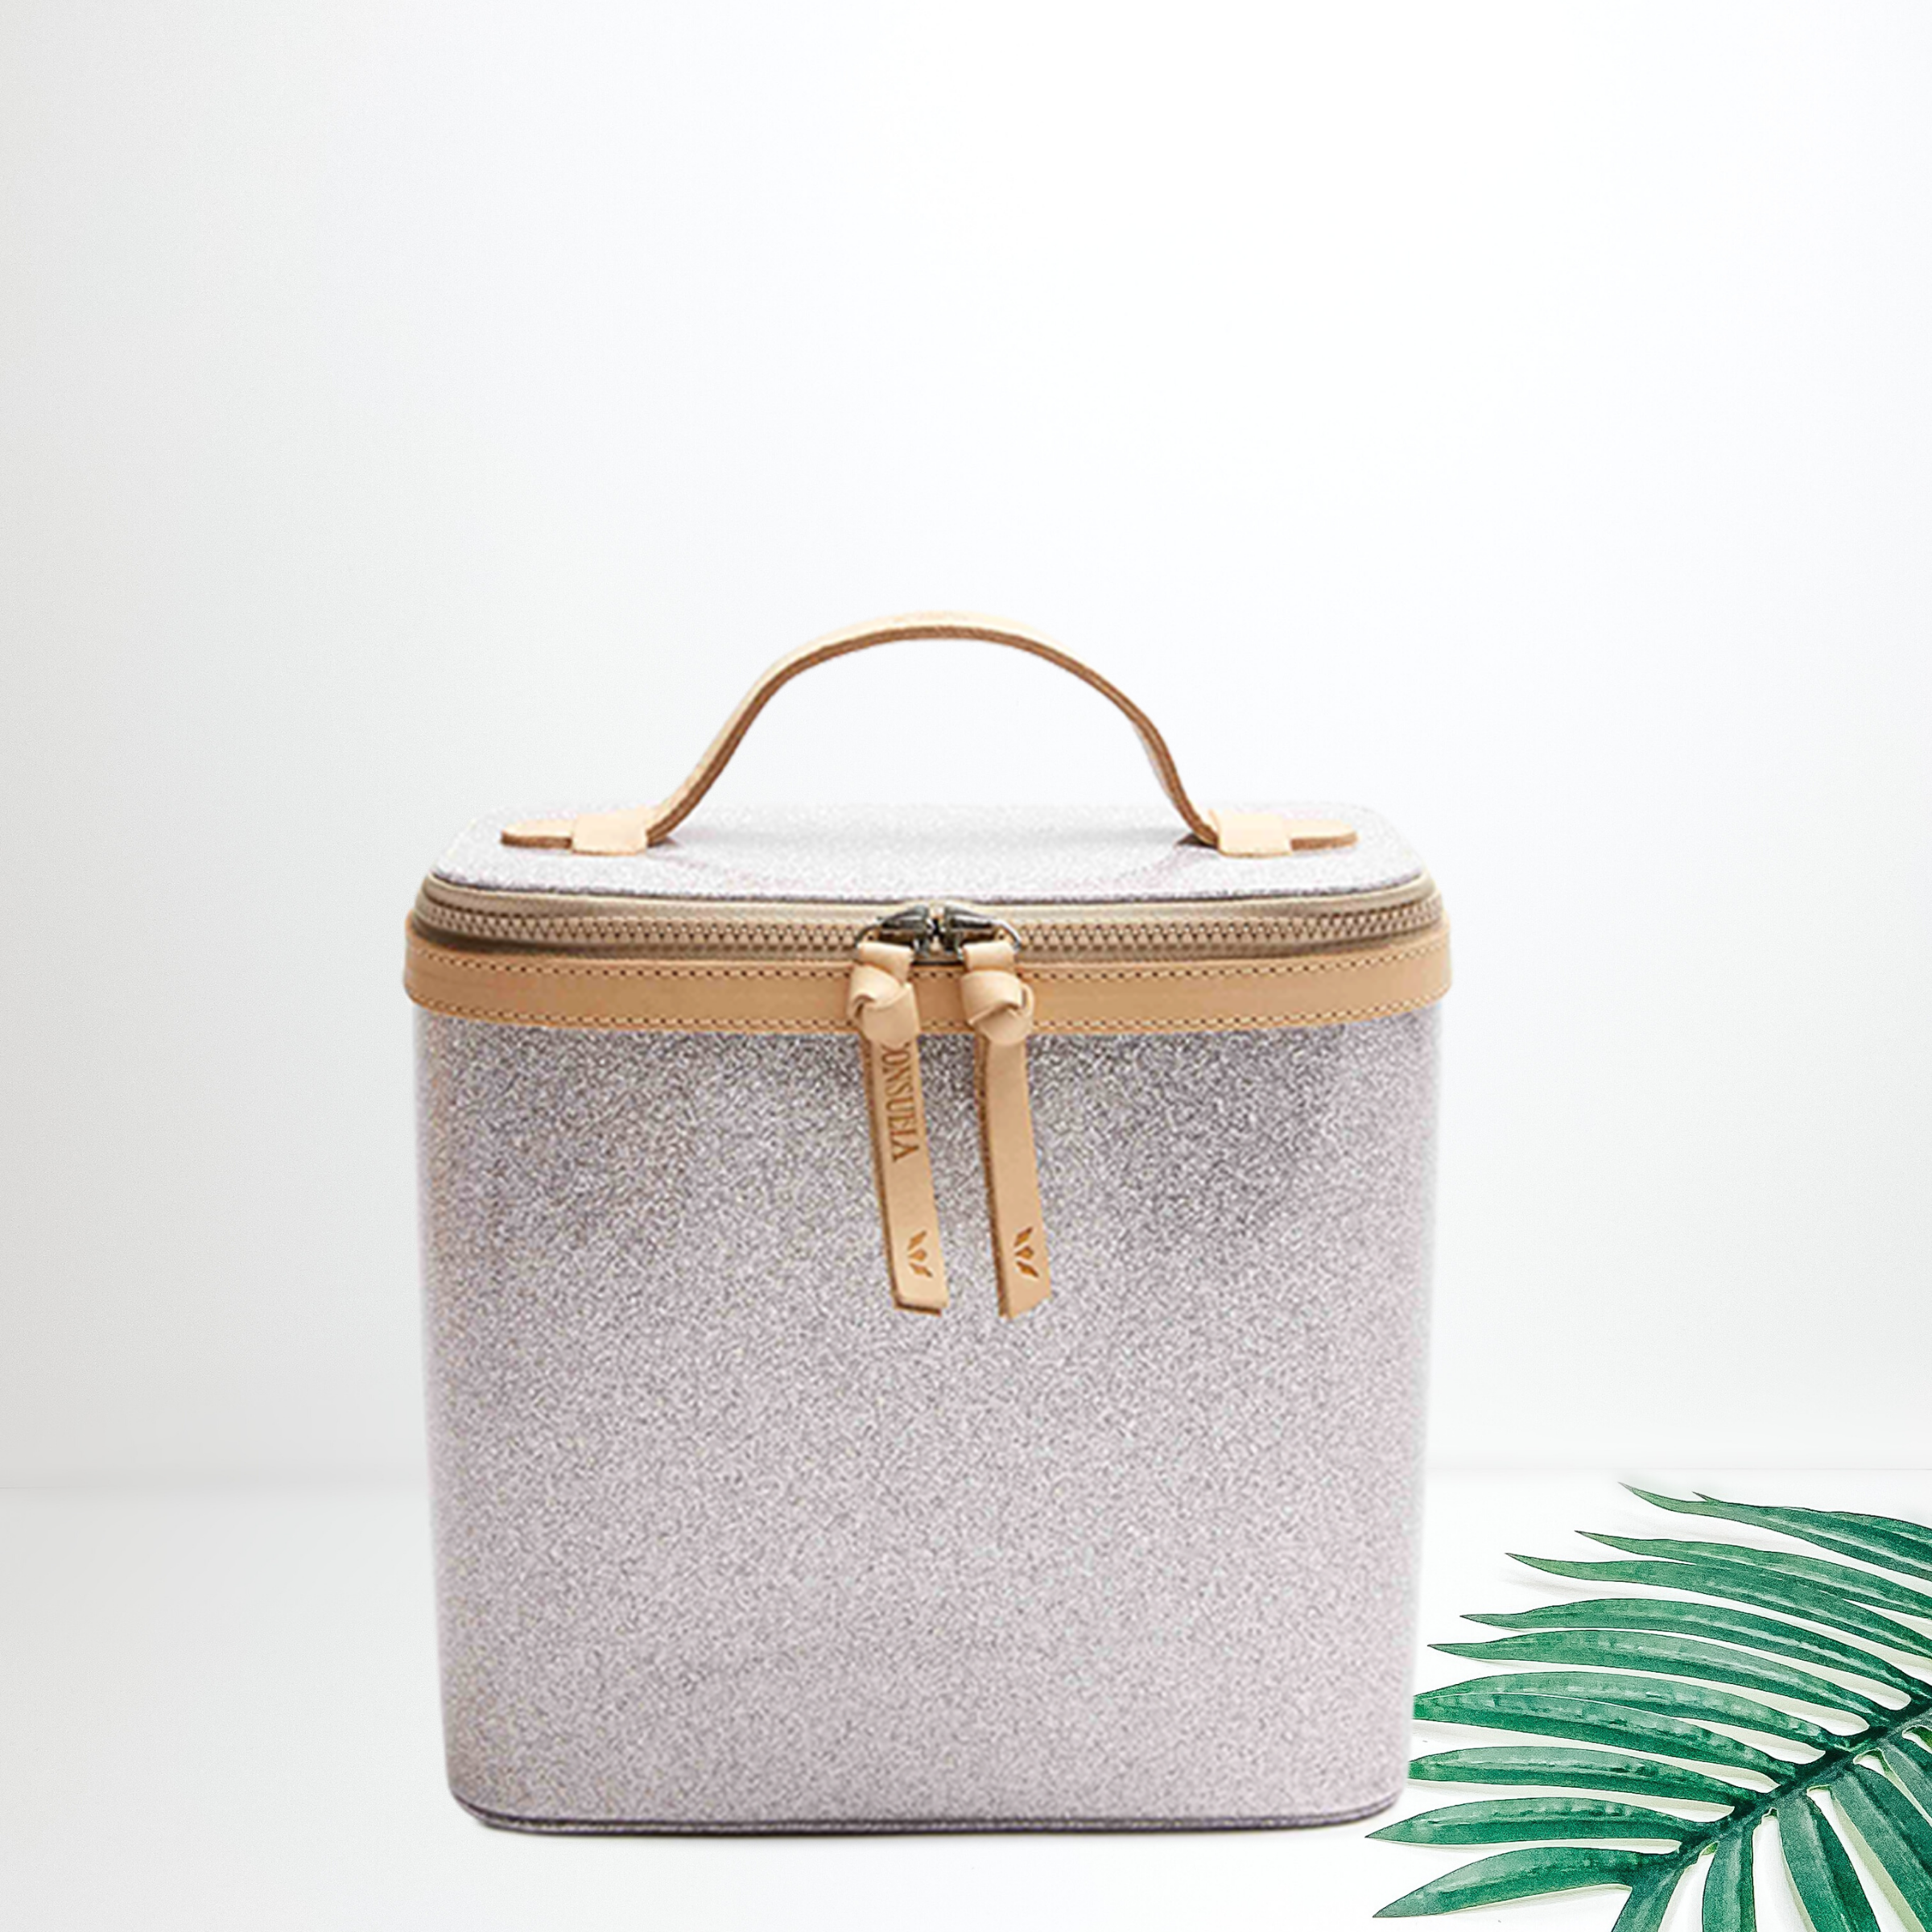 A light lilac glitter tall train case with leather details. Pictured on white background with a palm leaf and black sunglasses.